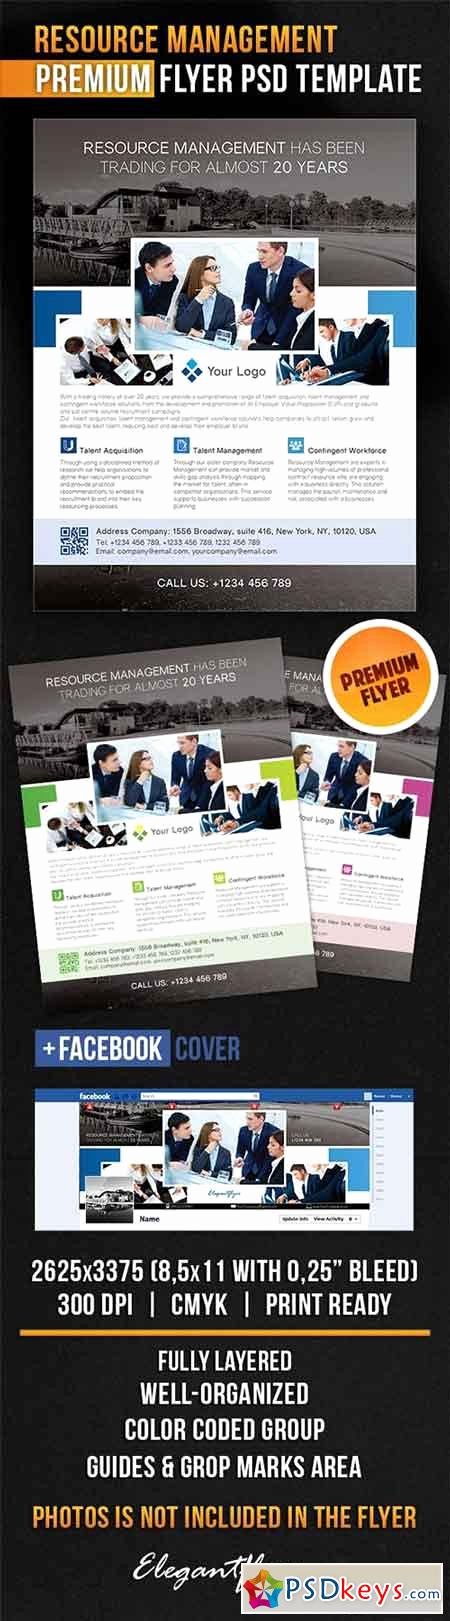 Resource Management Flyer Psd Template Cover